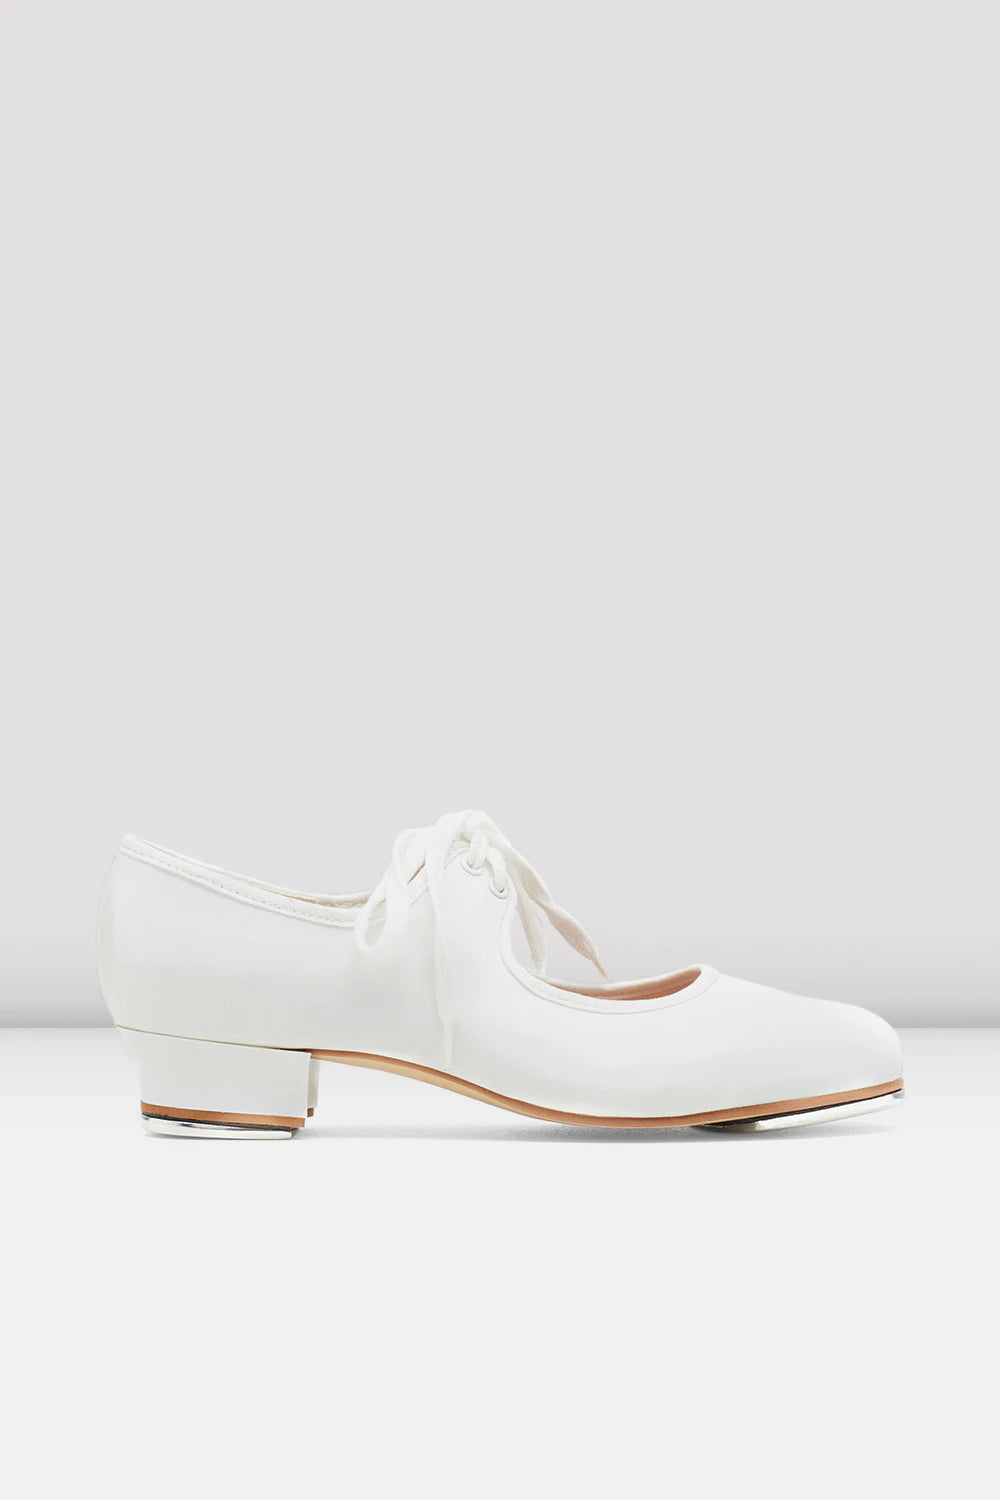 Timestep Tap Shoes